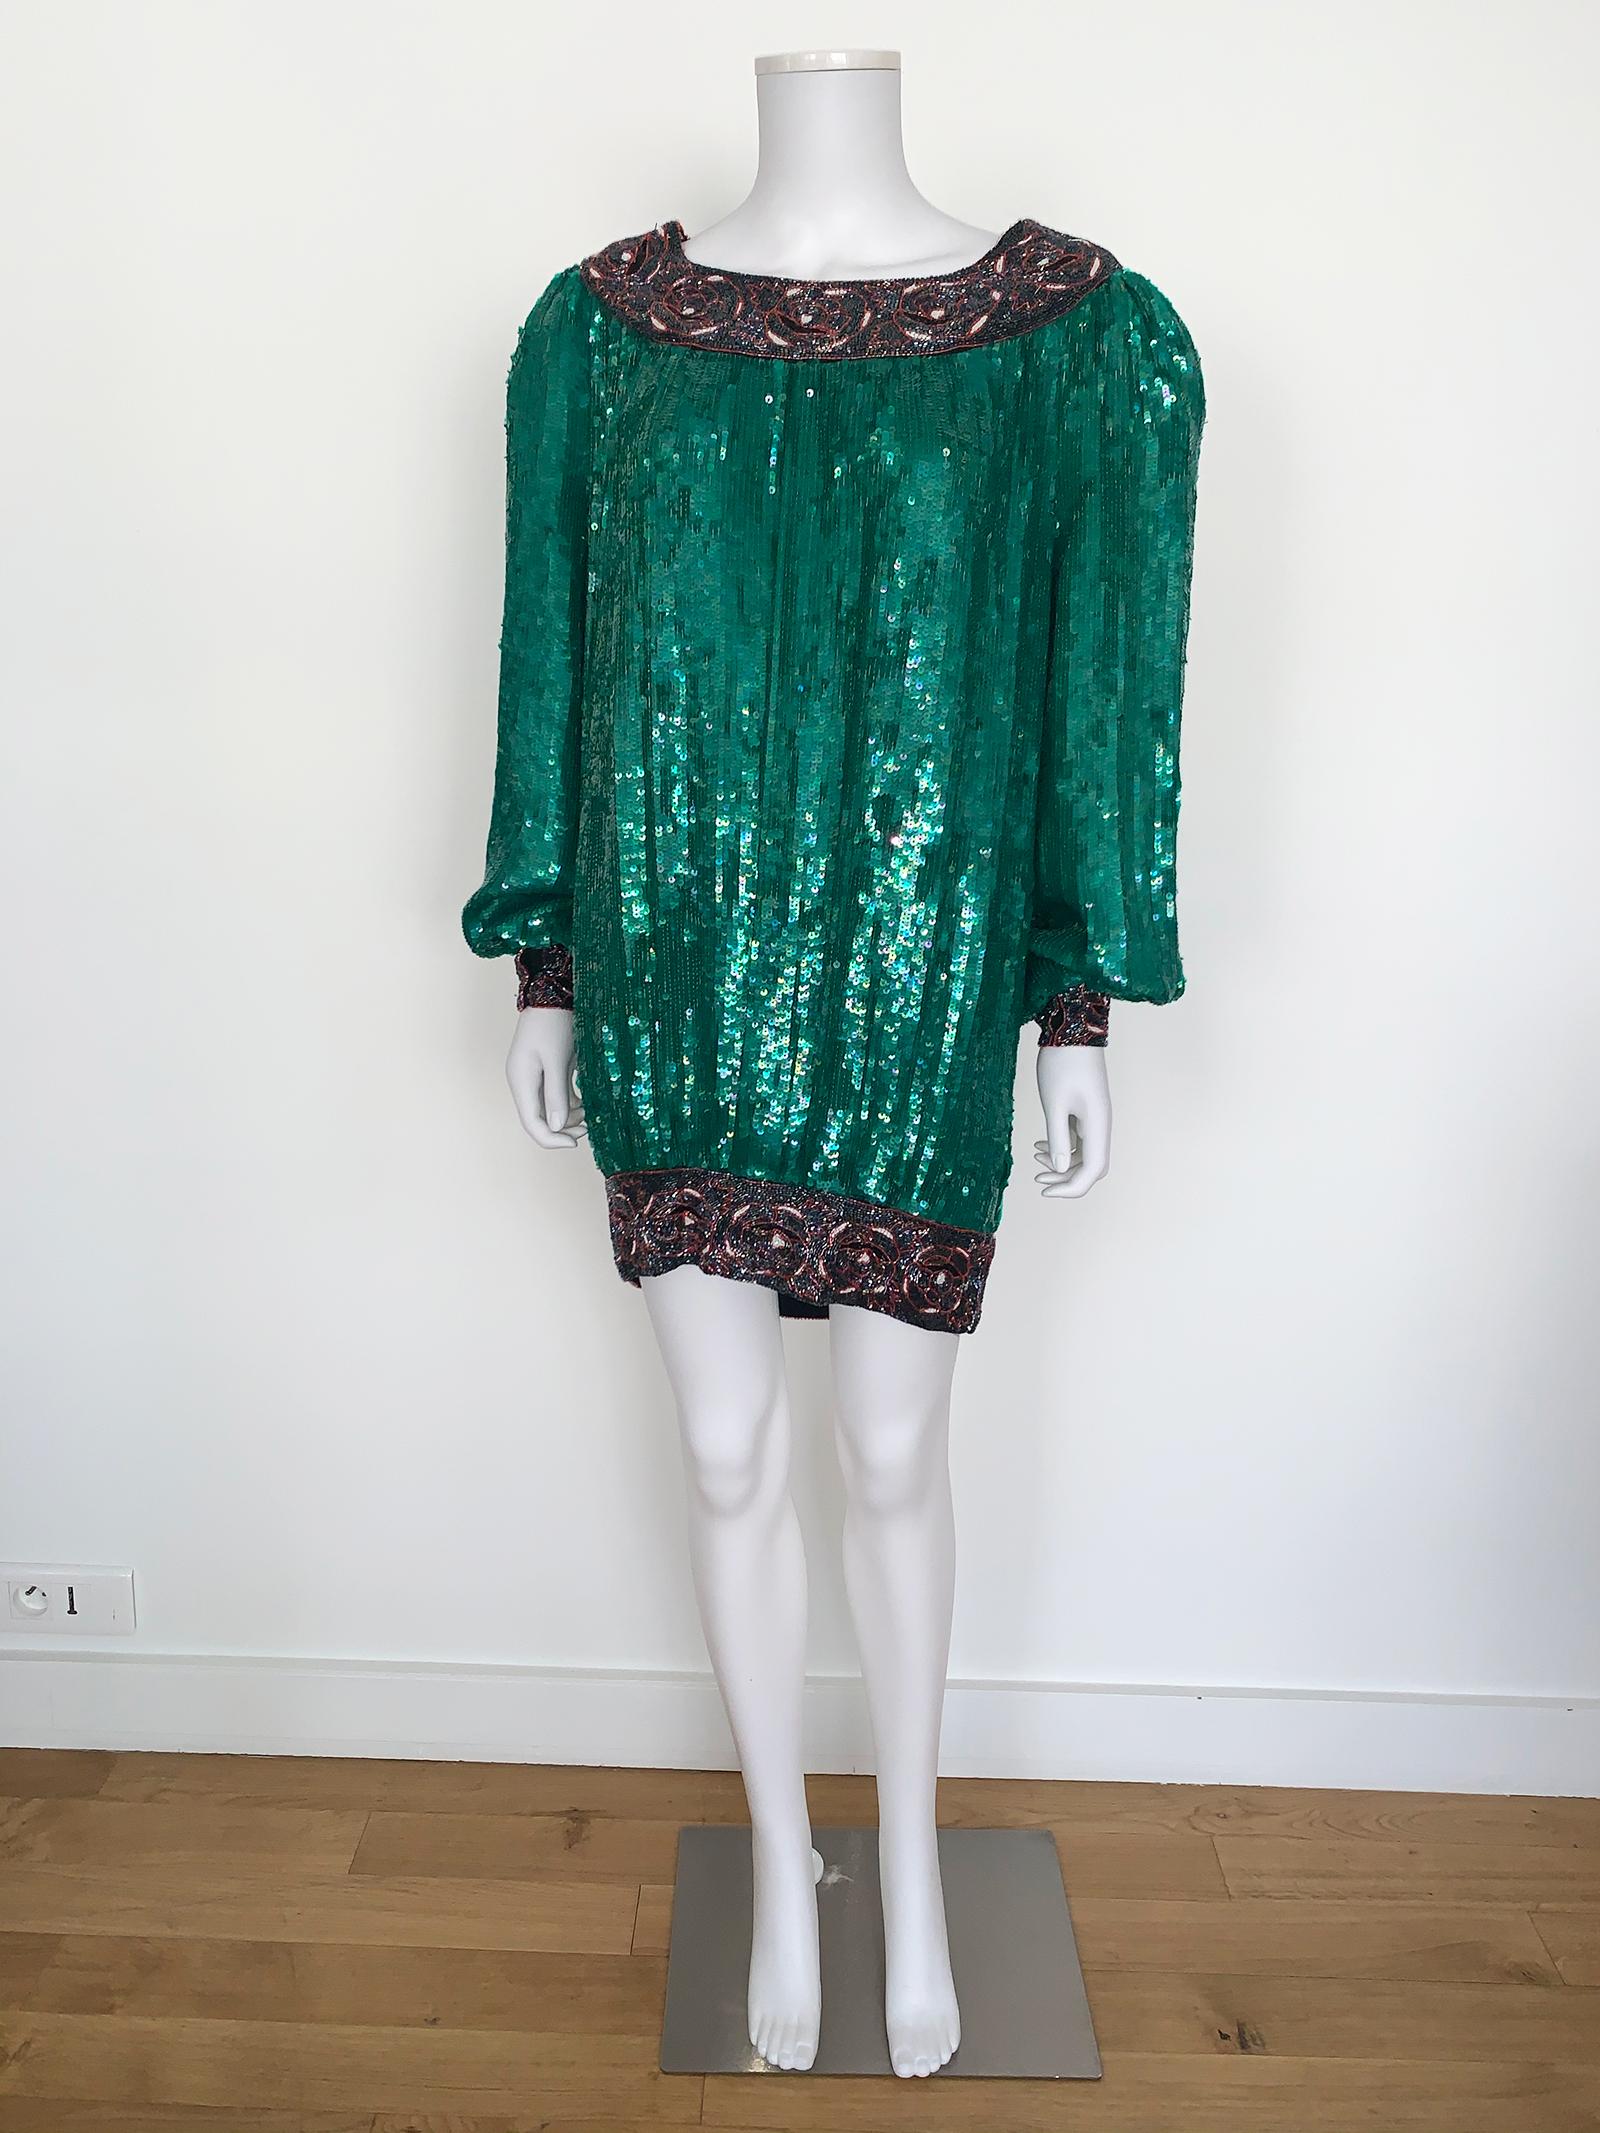 Vintage dress full sequin 
- Long Sleeves
- Mini Dress 
- Sequin allover the dress and Pearl at the collar, the bottom and the bottom of sleeves
- Ballon sleeves and shoulder pads 
- Very good condition 
- Size M 
- True vintage dress 